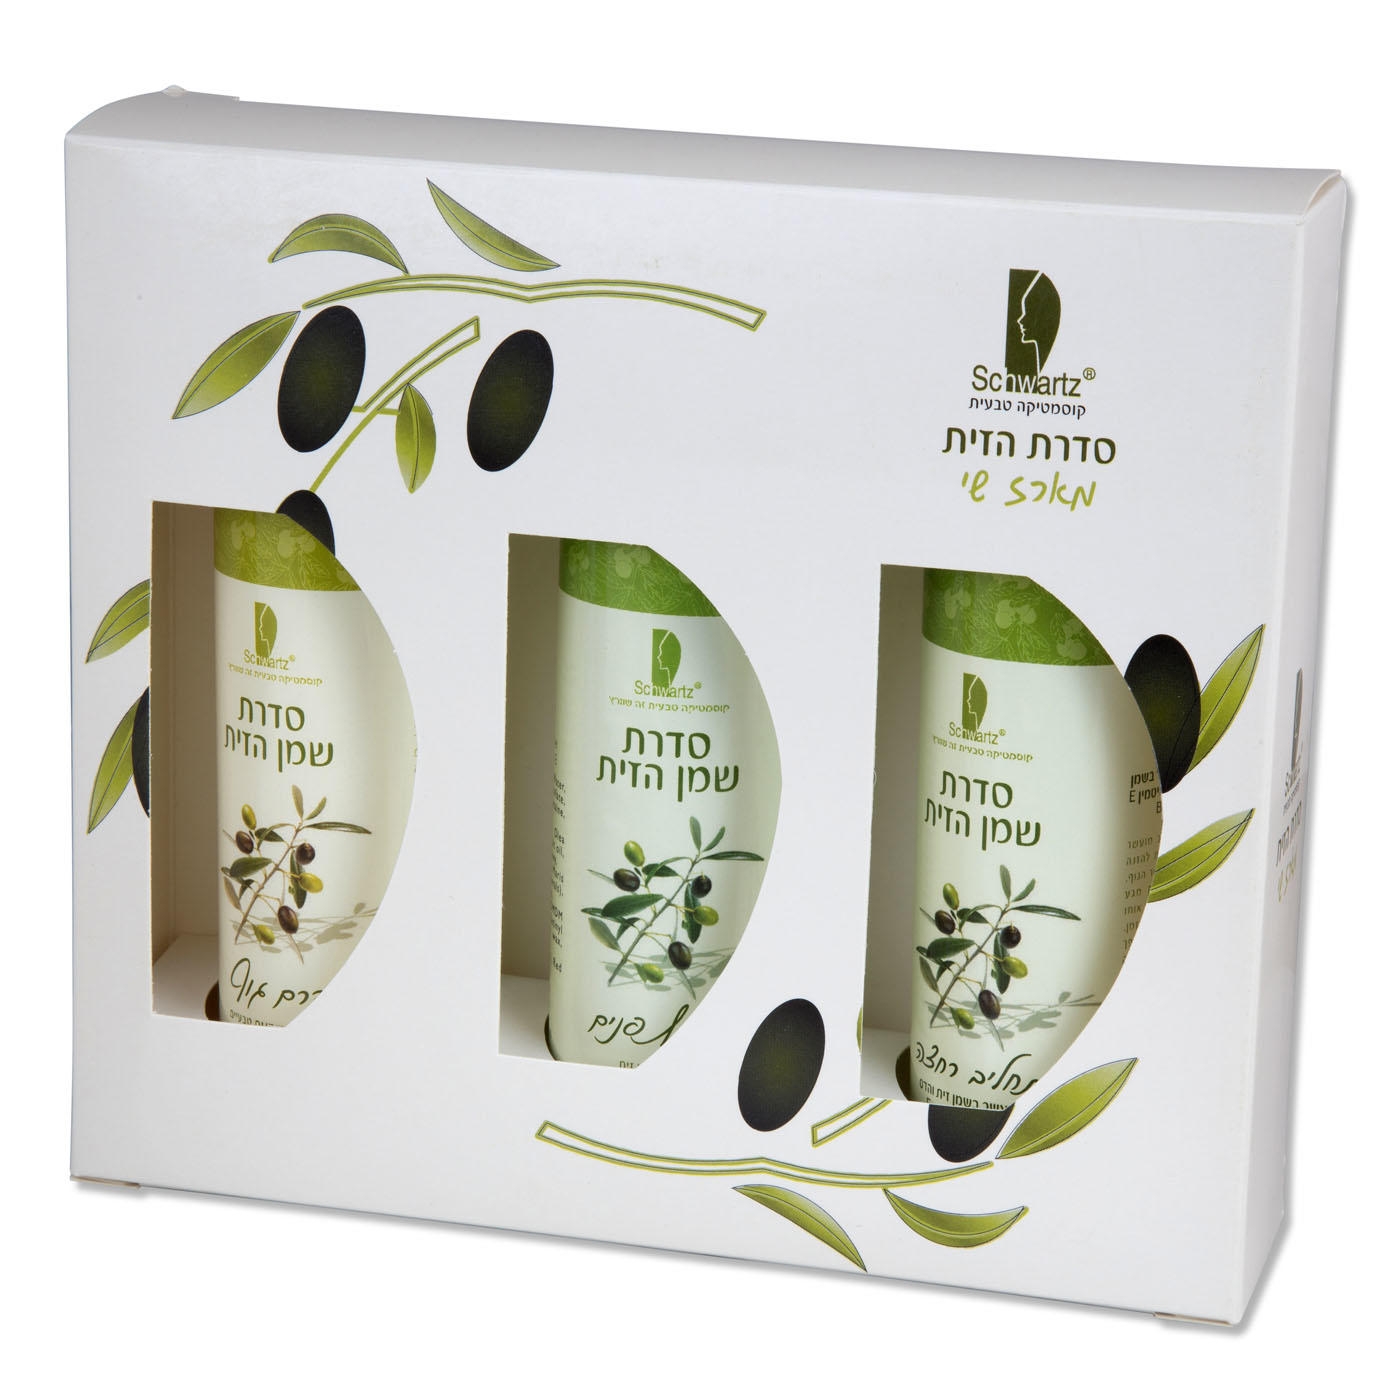 Schwartz Olive Oil and Myrtle Gift Set (Body Lotion, Face Wash & Creamy Body Wash) - 1